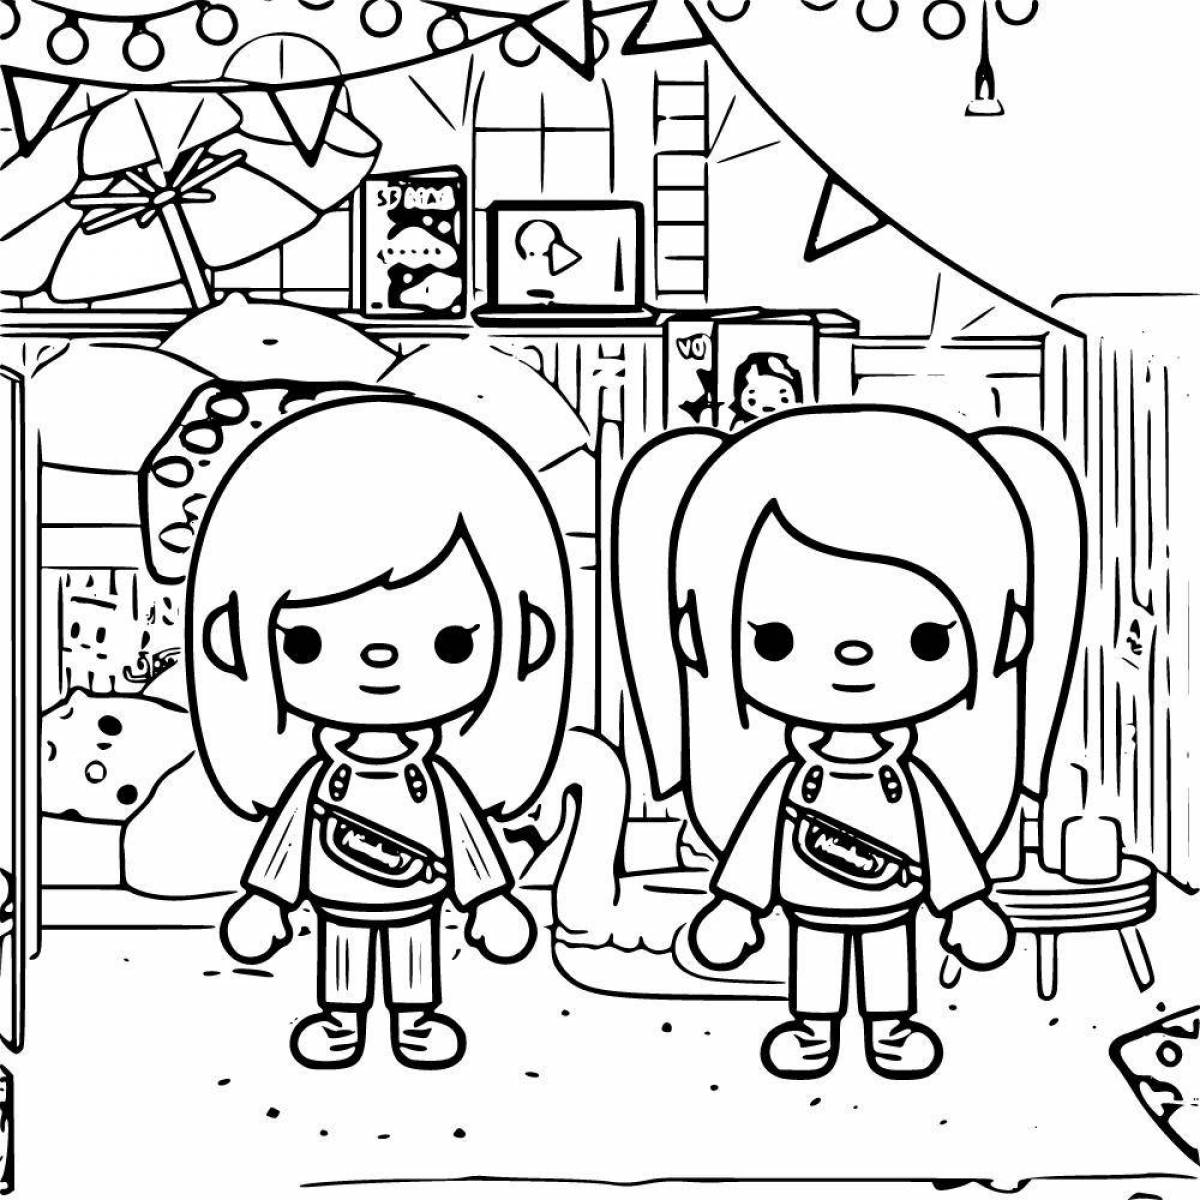 Fun boca current store coloring page